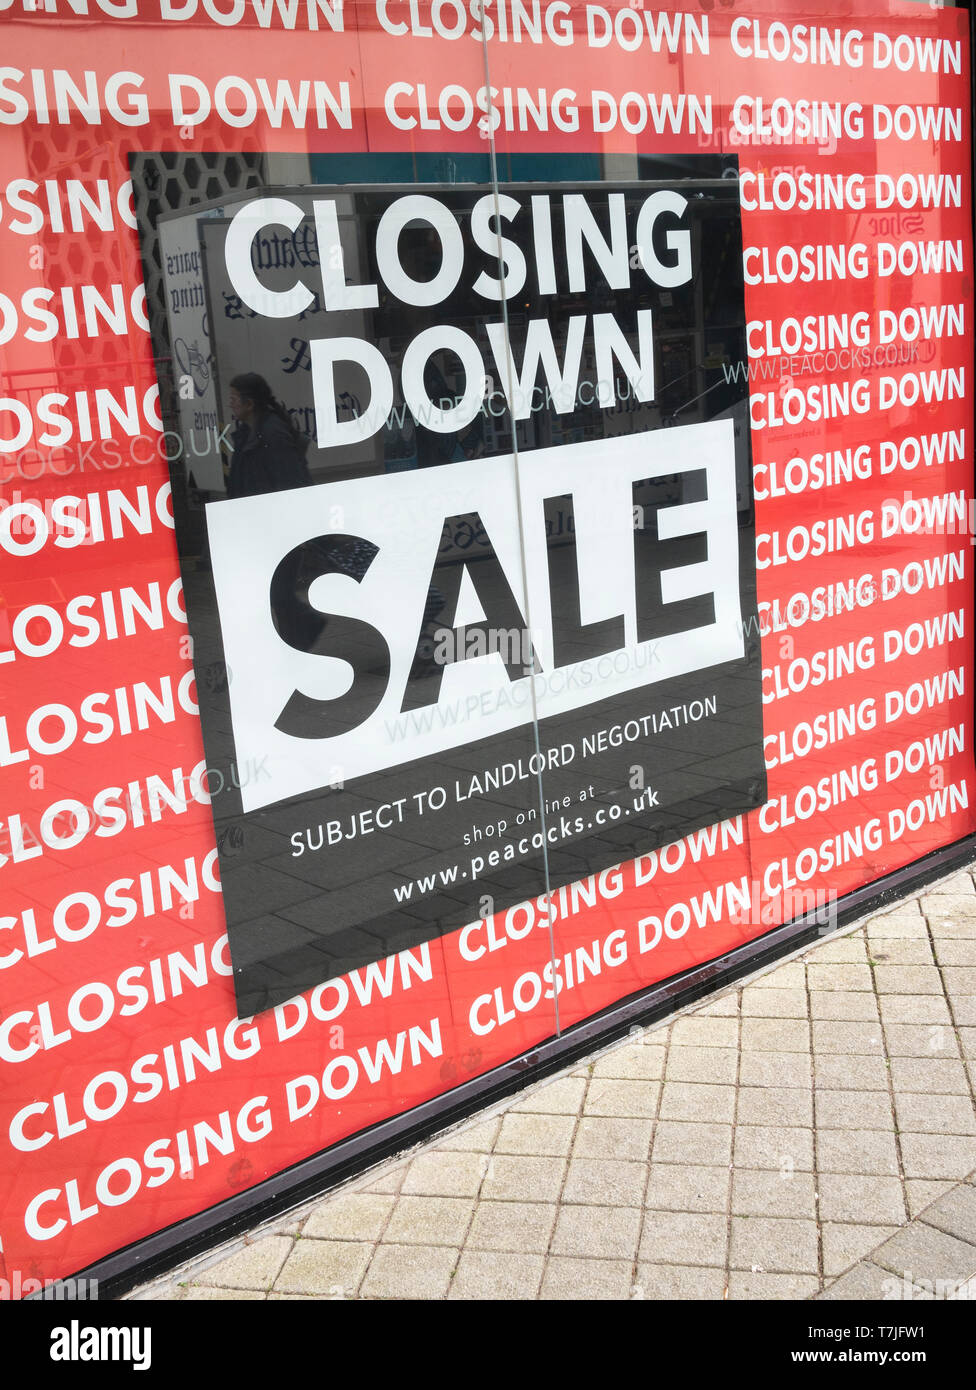 St Austell Peacocks shop Closing Down sign. For economic slow-down, falling sales, retail high street crisis, death of high street, winners and losers Stock Photo